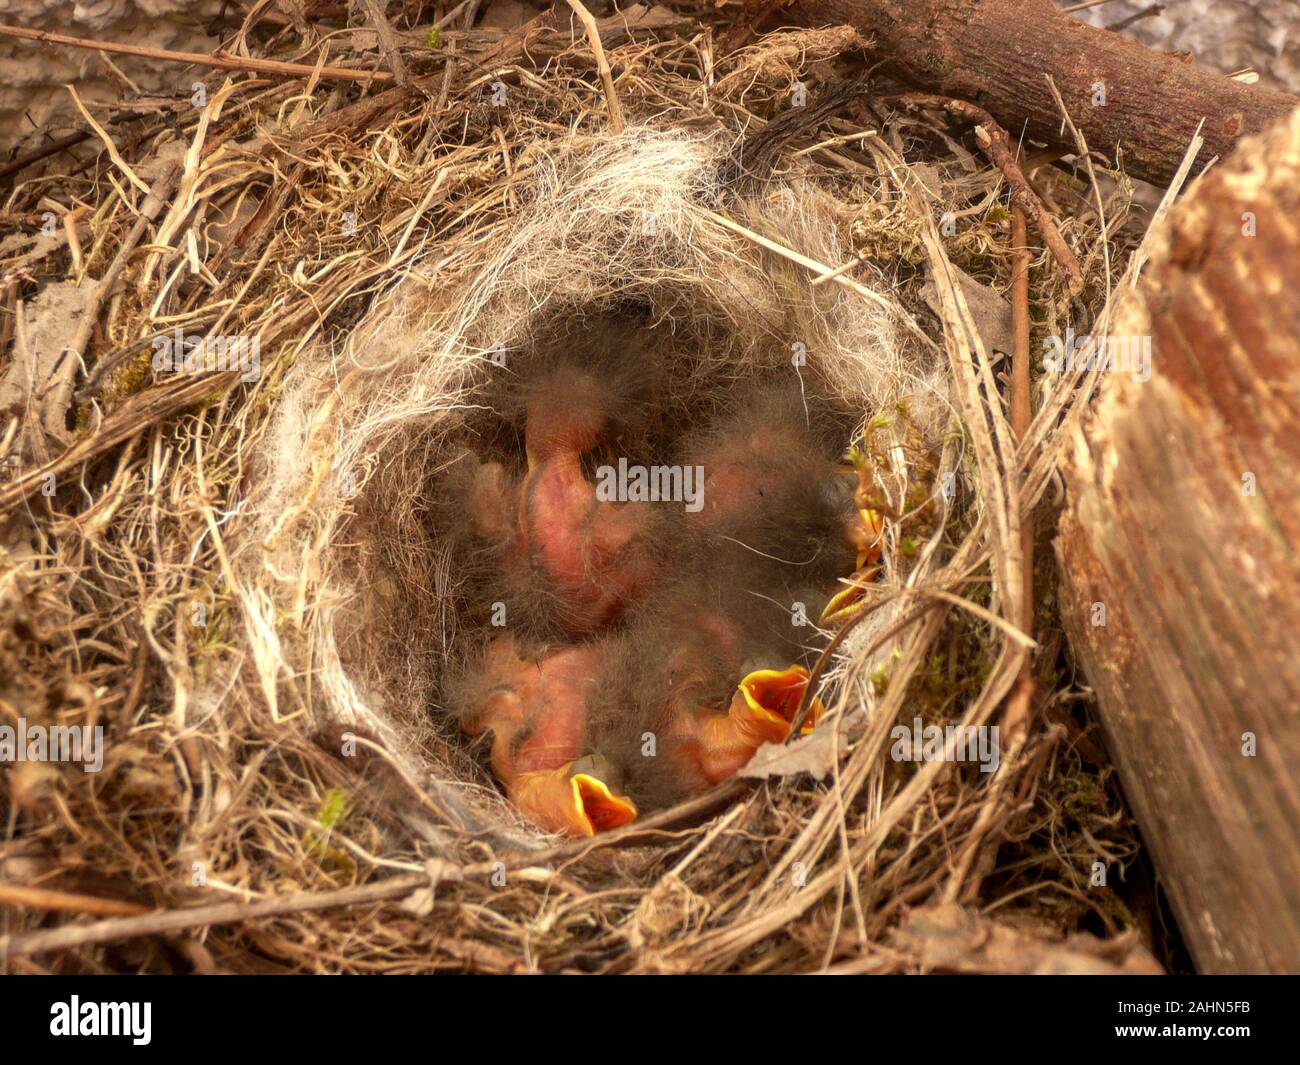 Newly hatched [hatchling] pied wagtail birds in the nest Stock Photo